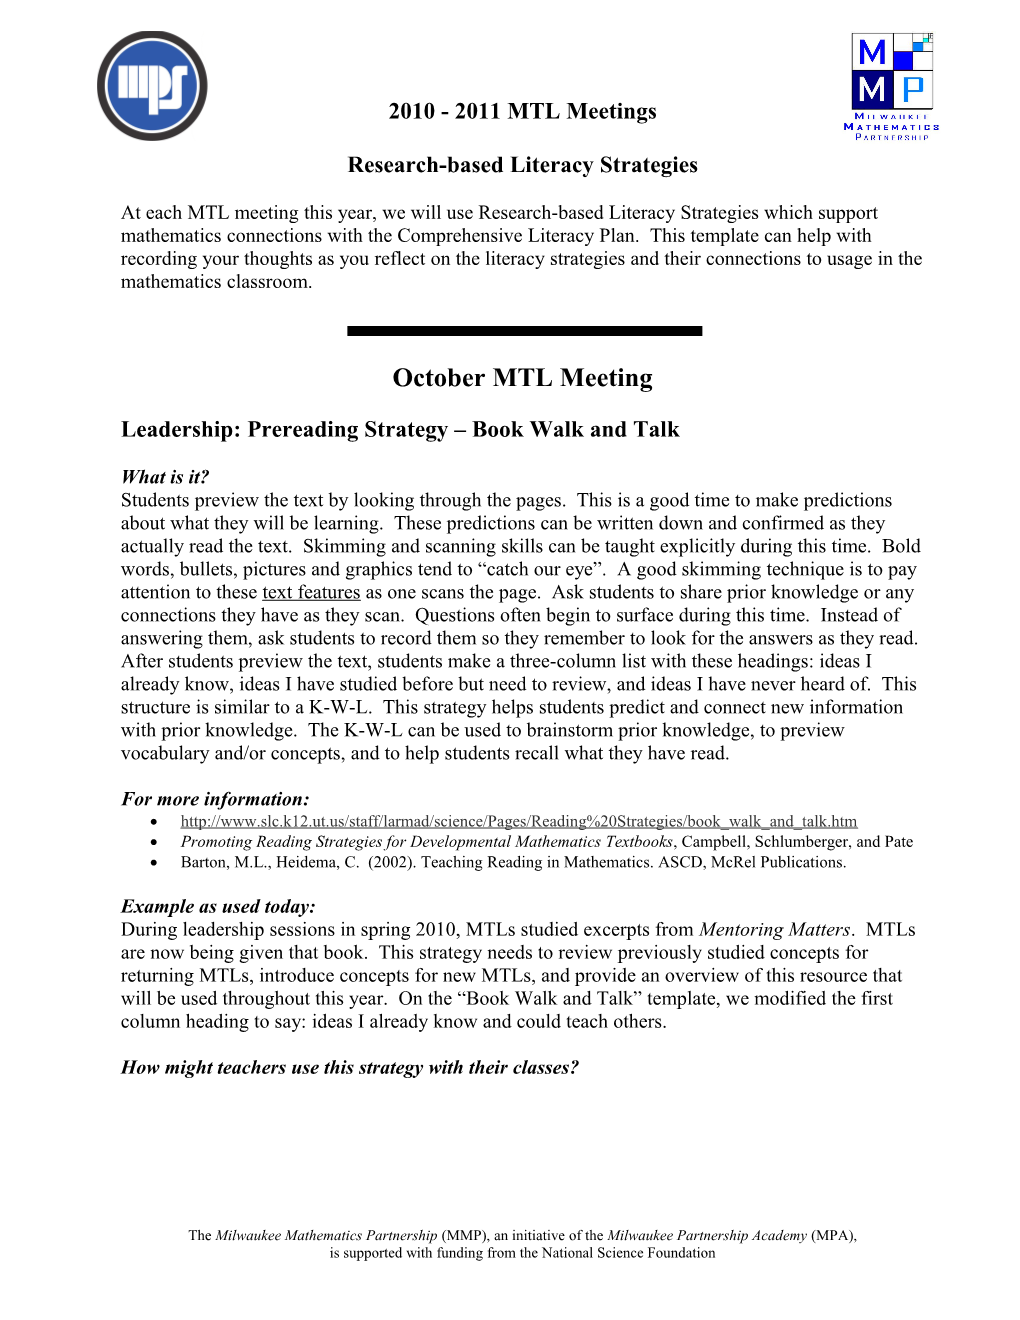 Research-Based Literacy Strategies